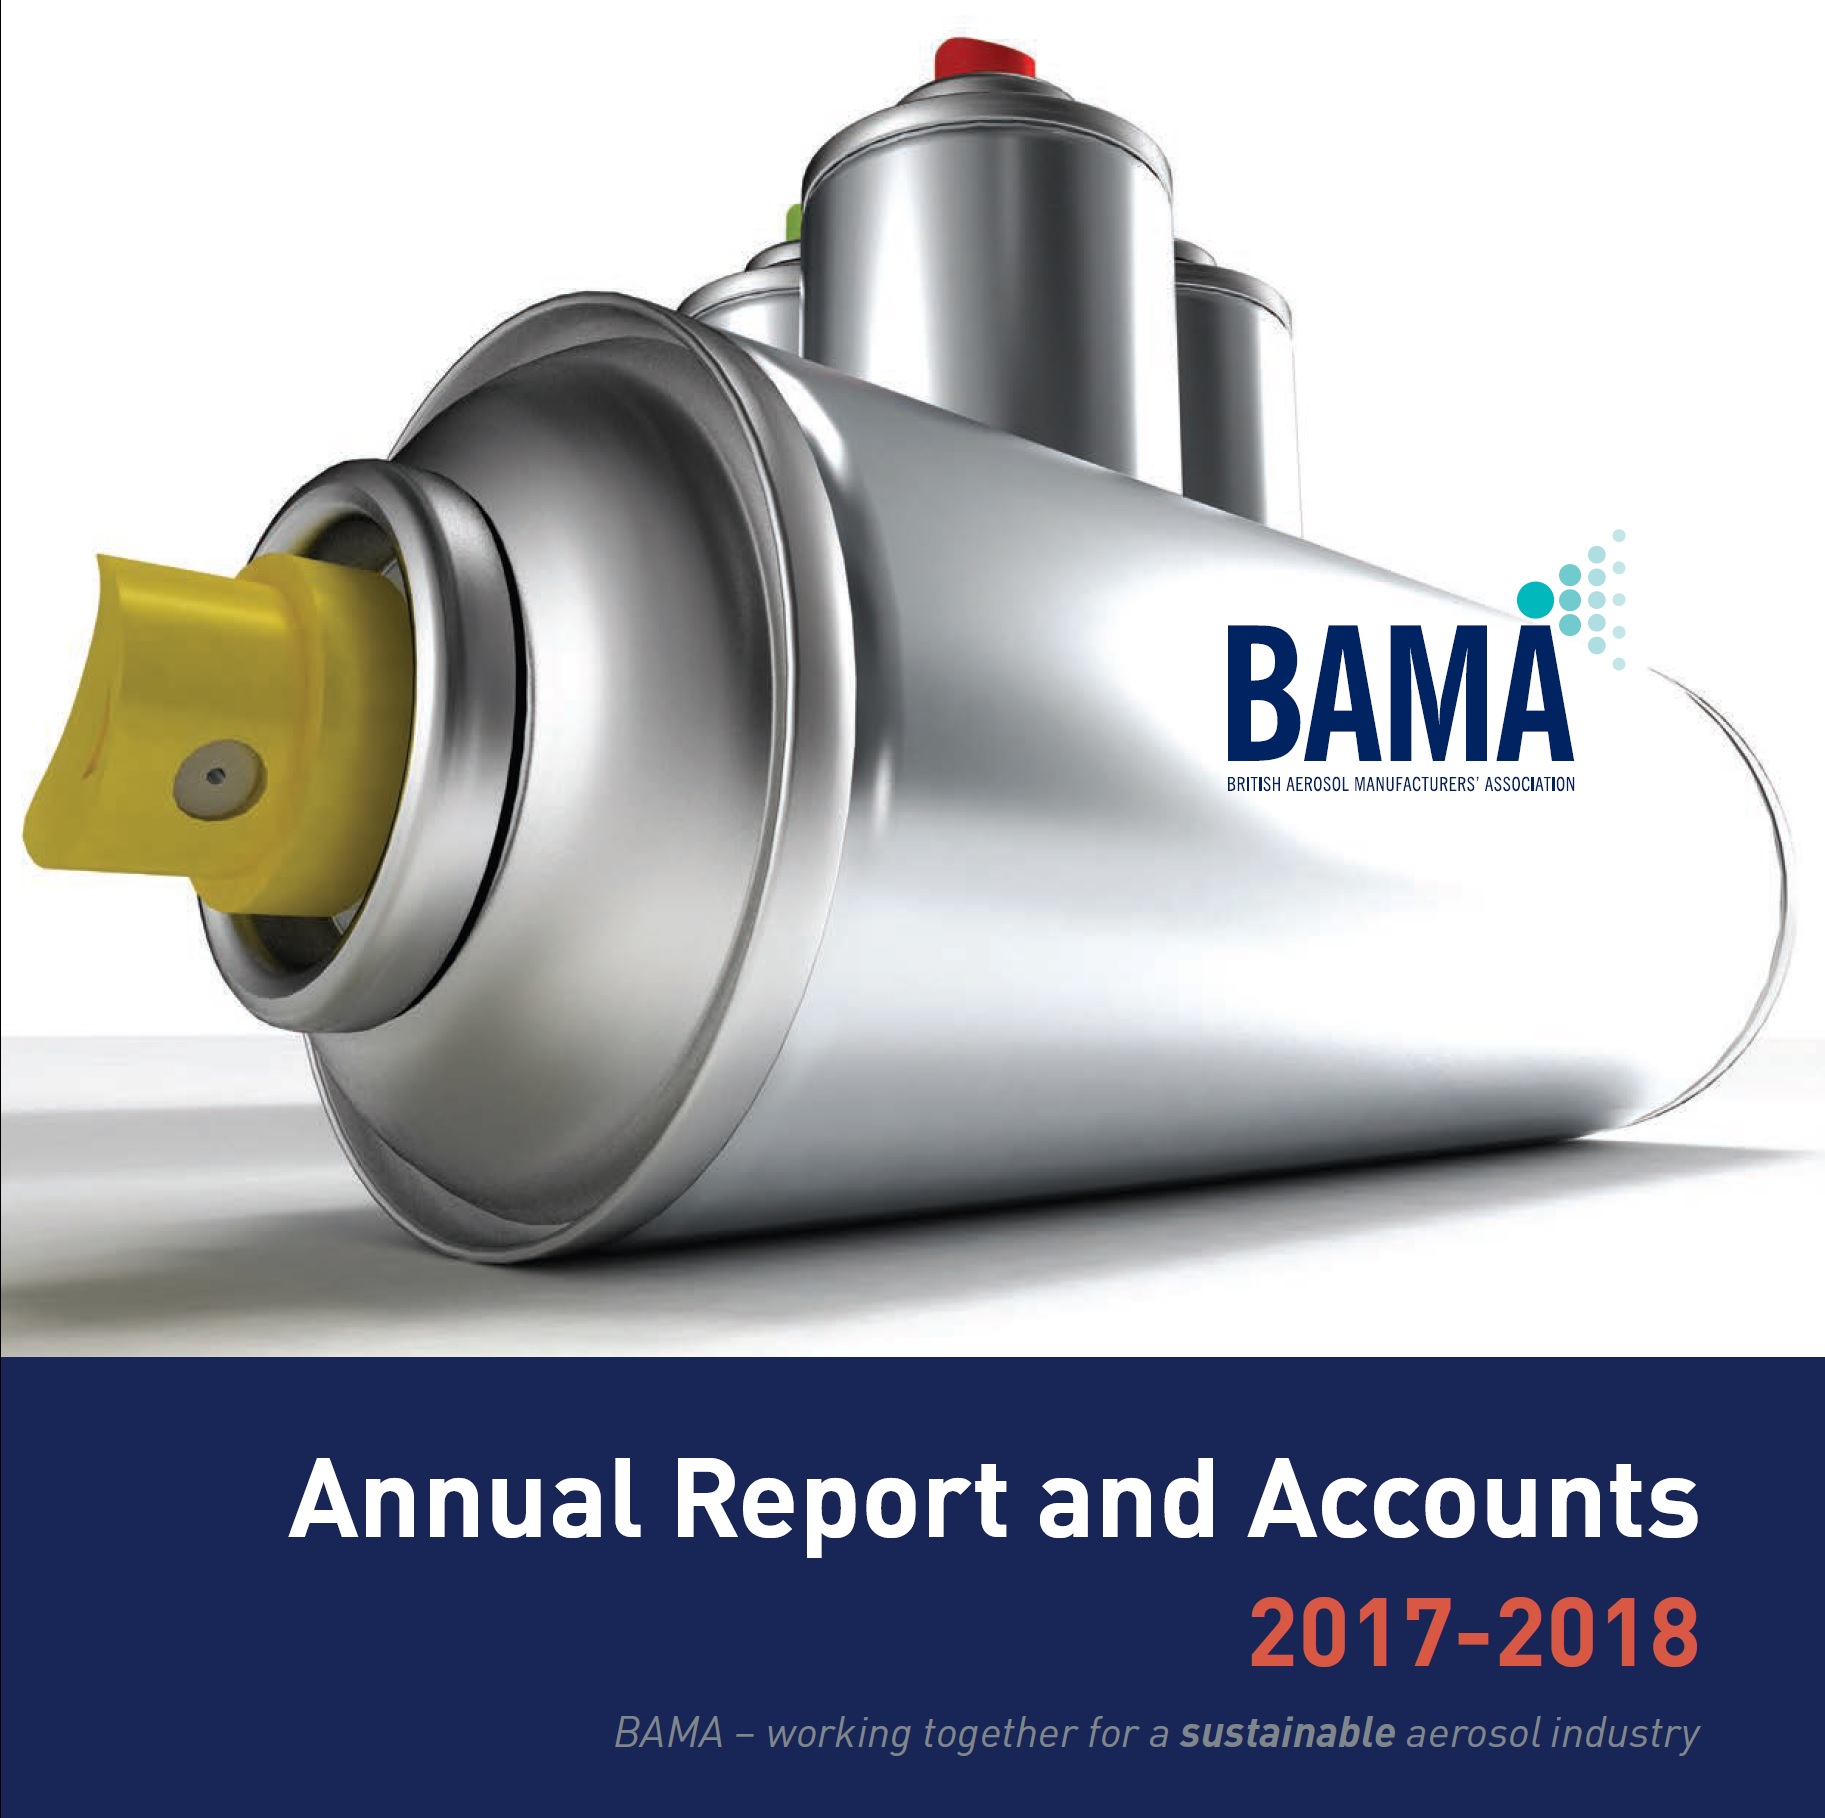 files/About BAMA/Annual Reports/2017-2018.pdf